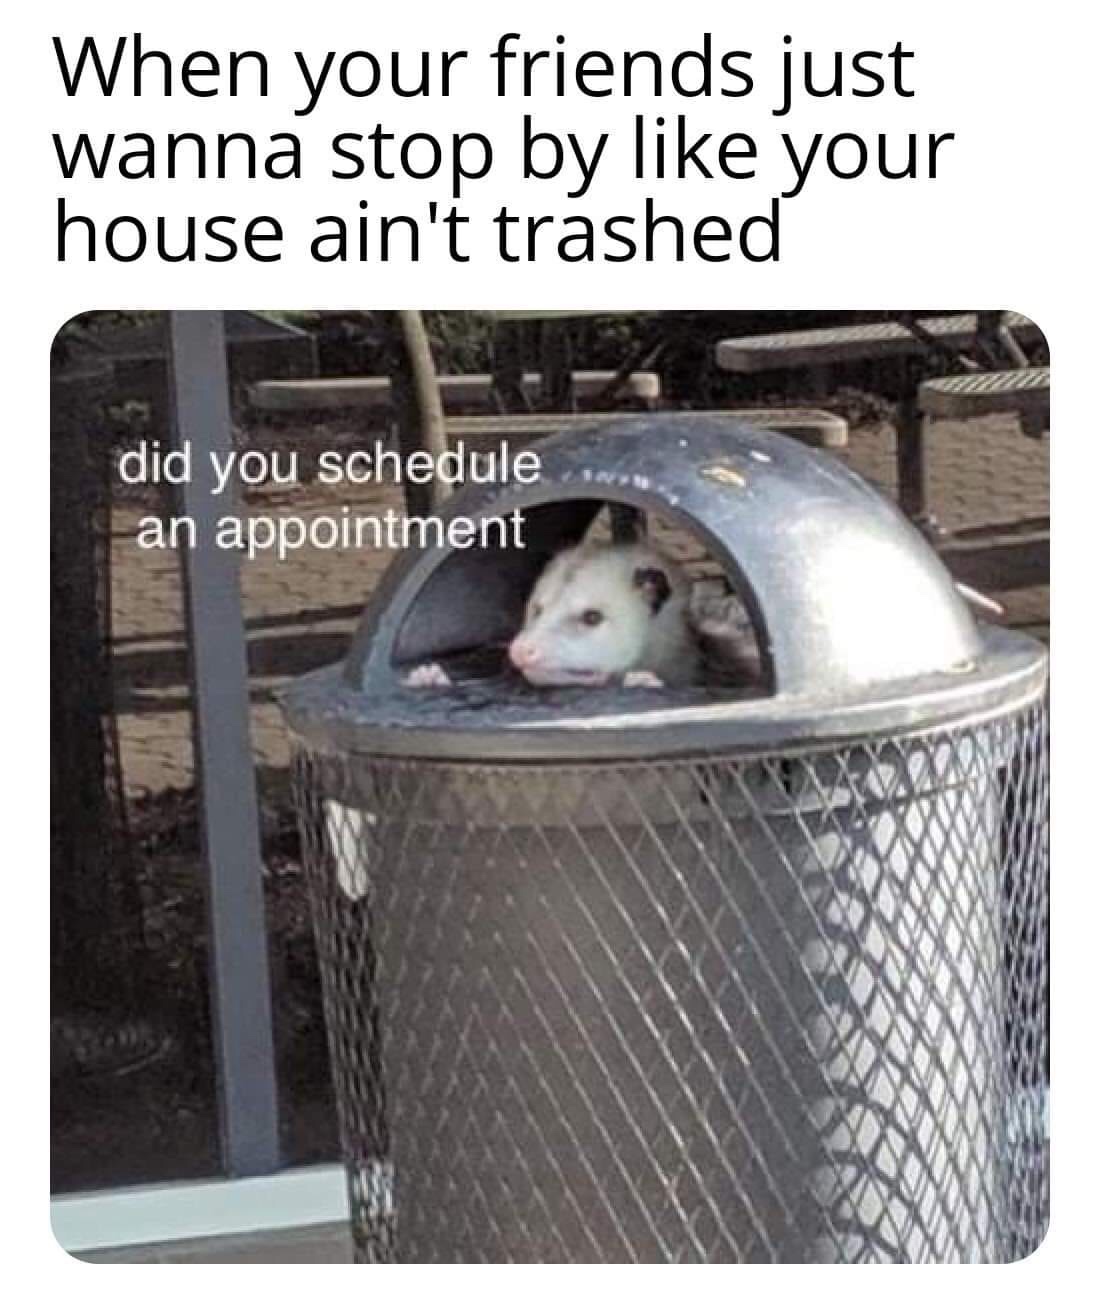 cursed possum - When your friends just wanna stop by your house ain't trashed did you schedule an appointment